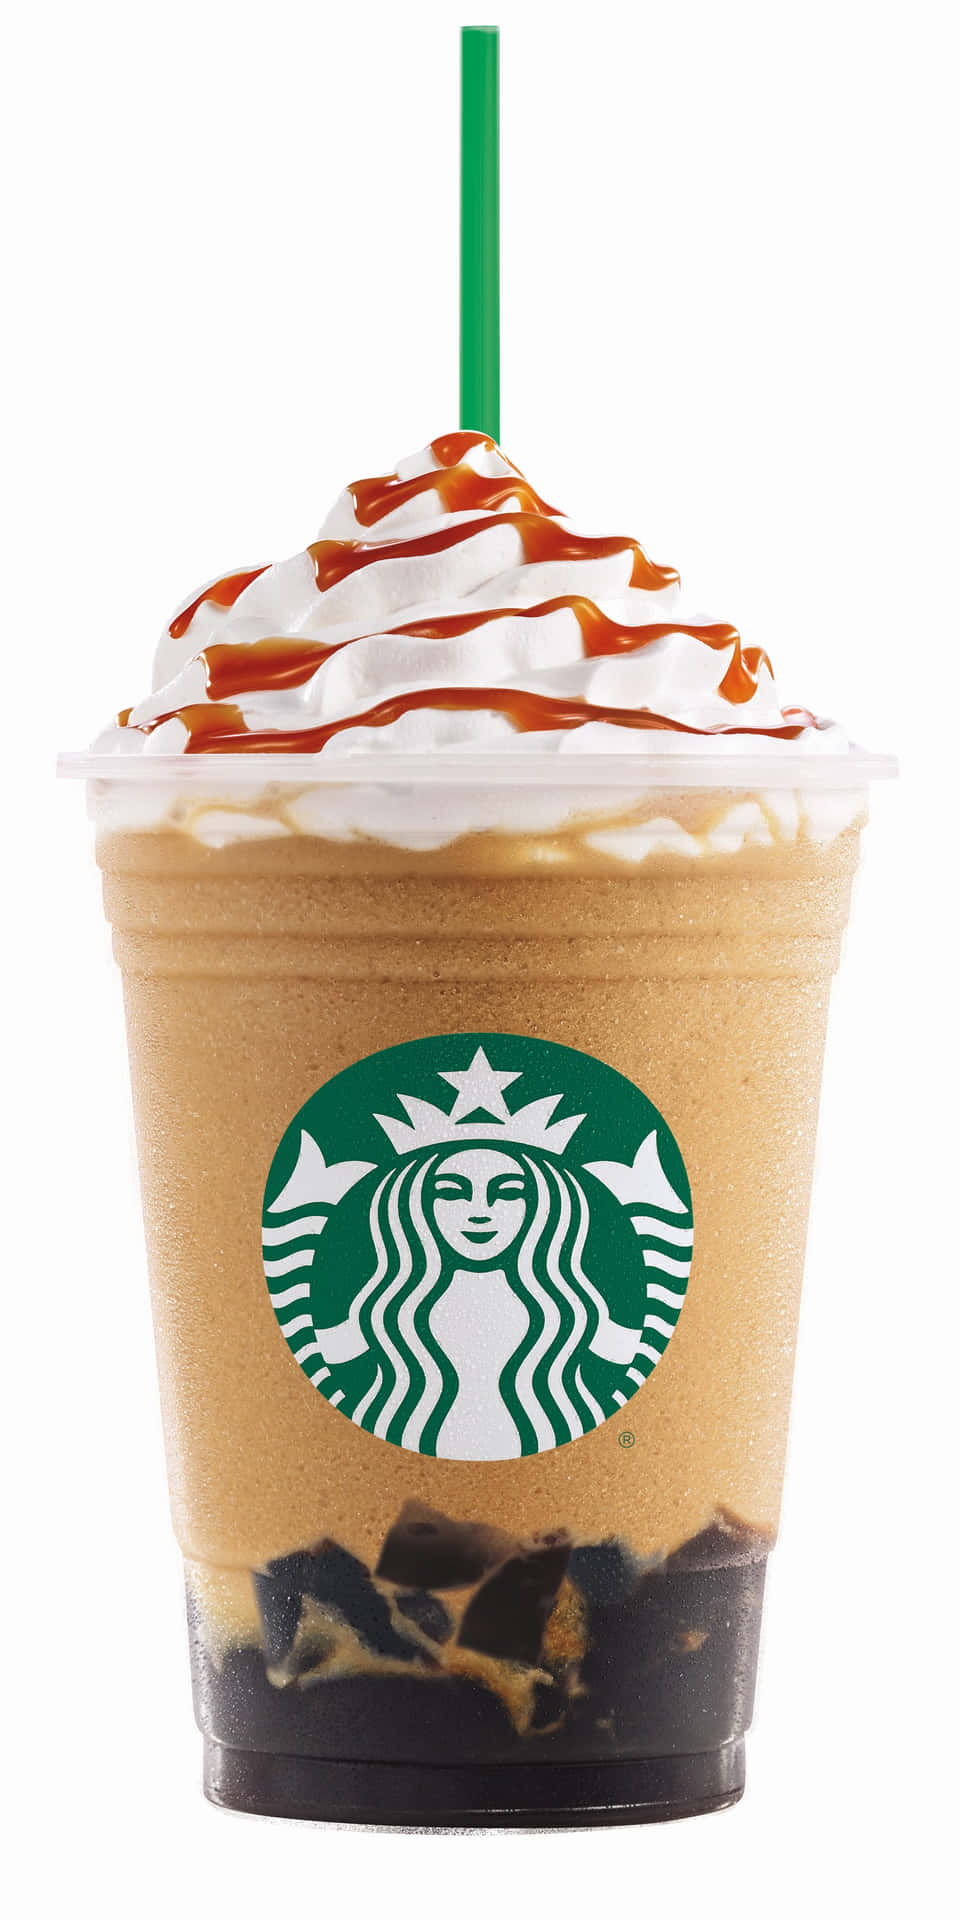 Enjoy a delicious cup of Starbucks coffee today